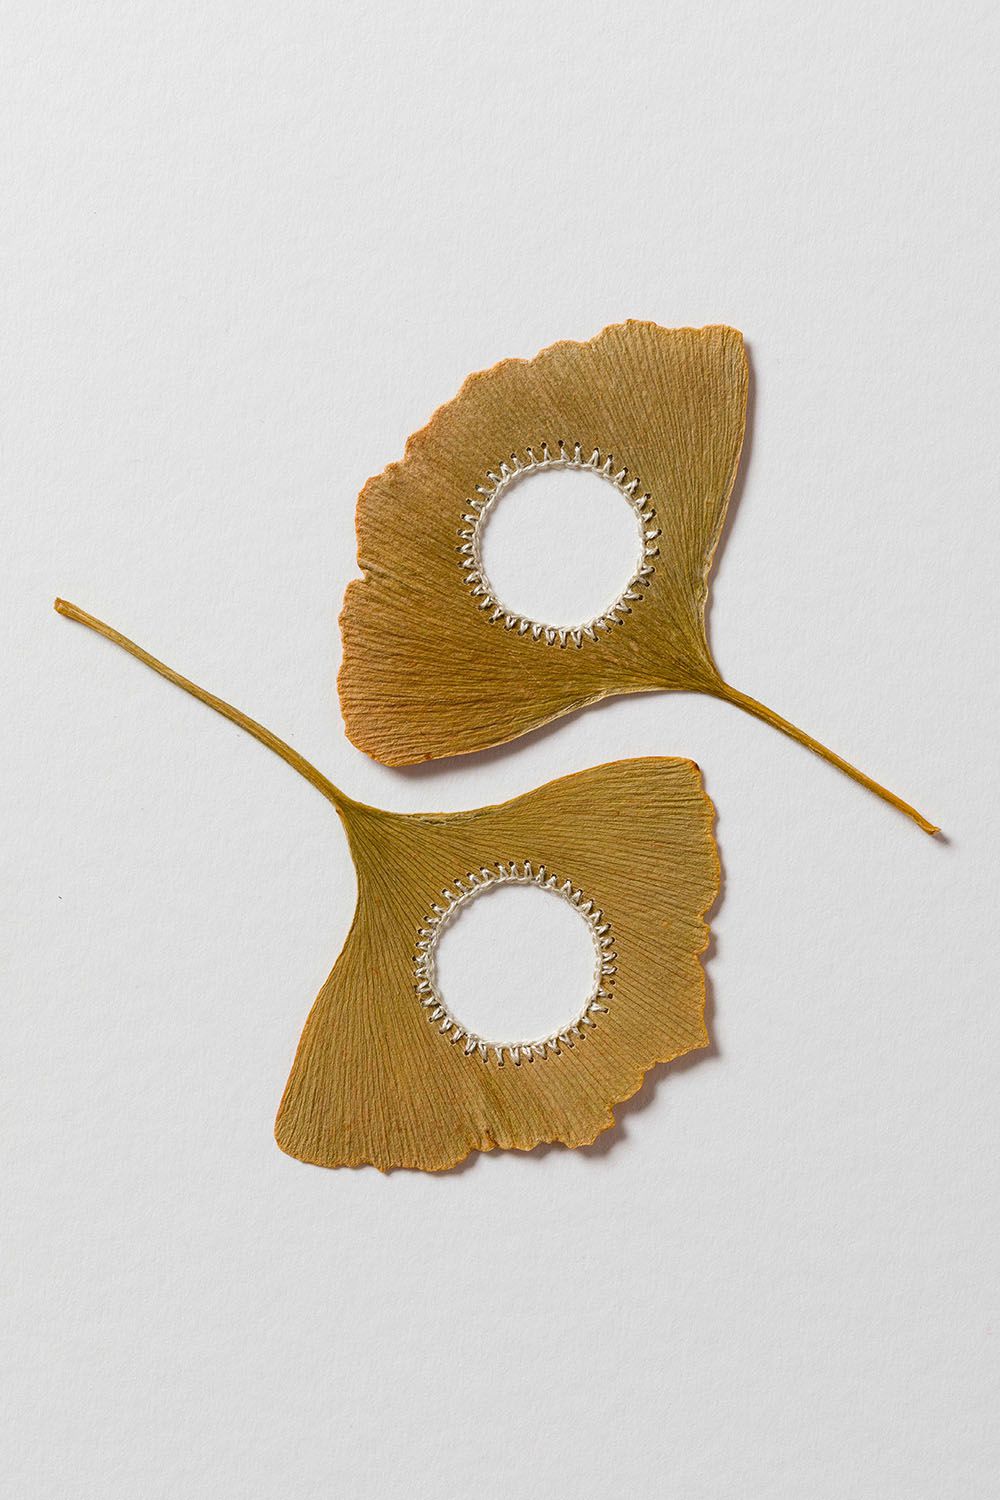 Beautiful Sculptures Of Dried Leaves Crocheted Delicate Patterns By Susanna Bauer 7